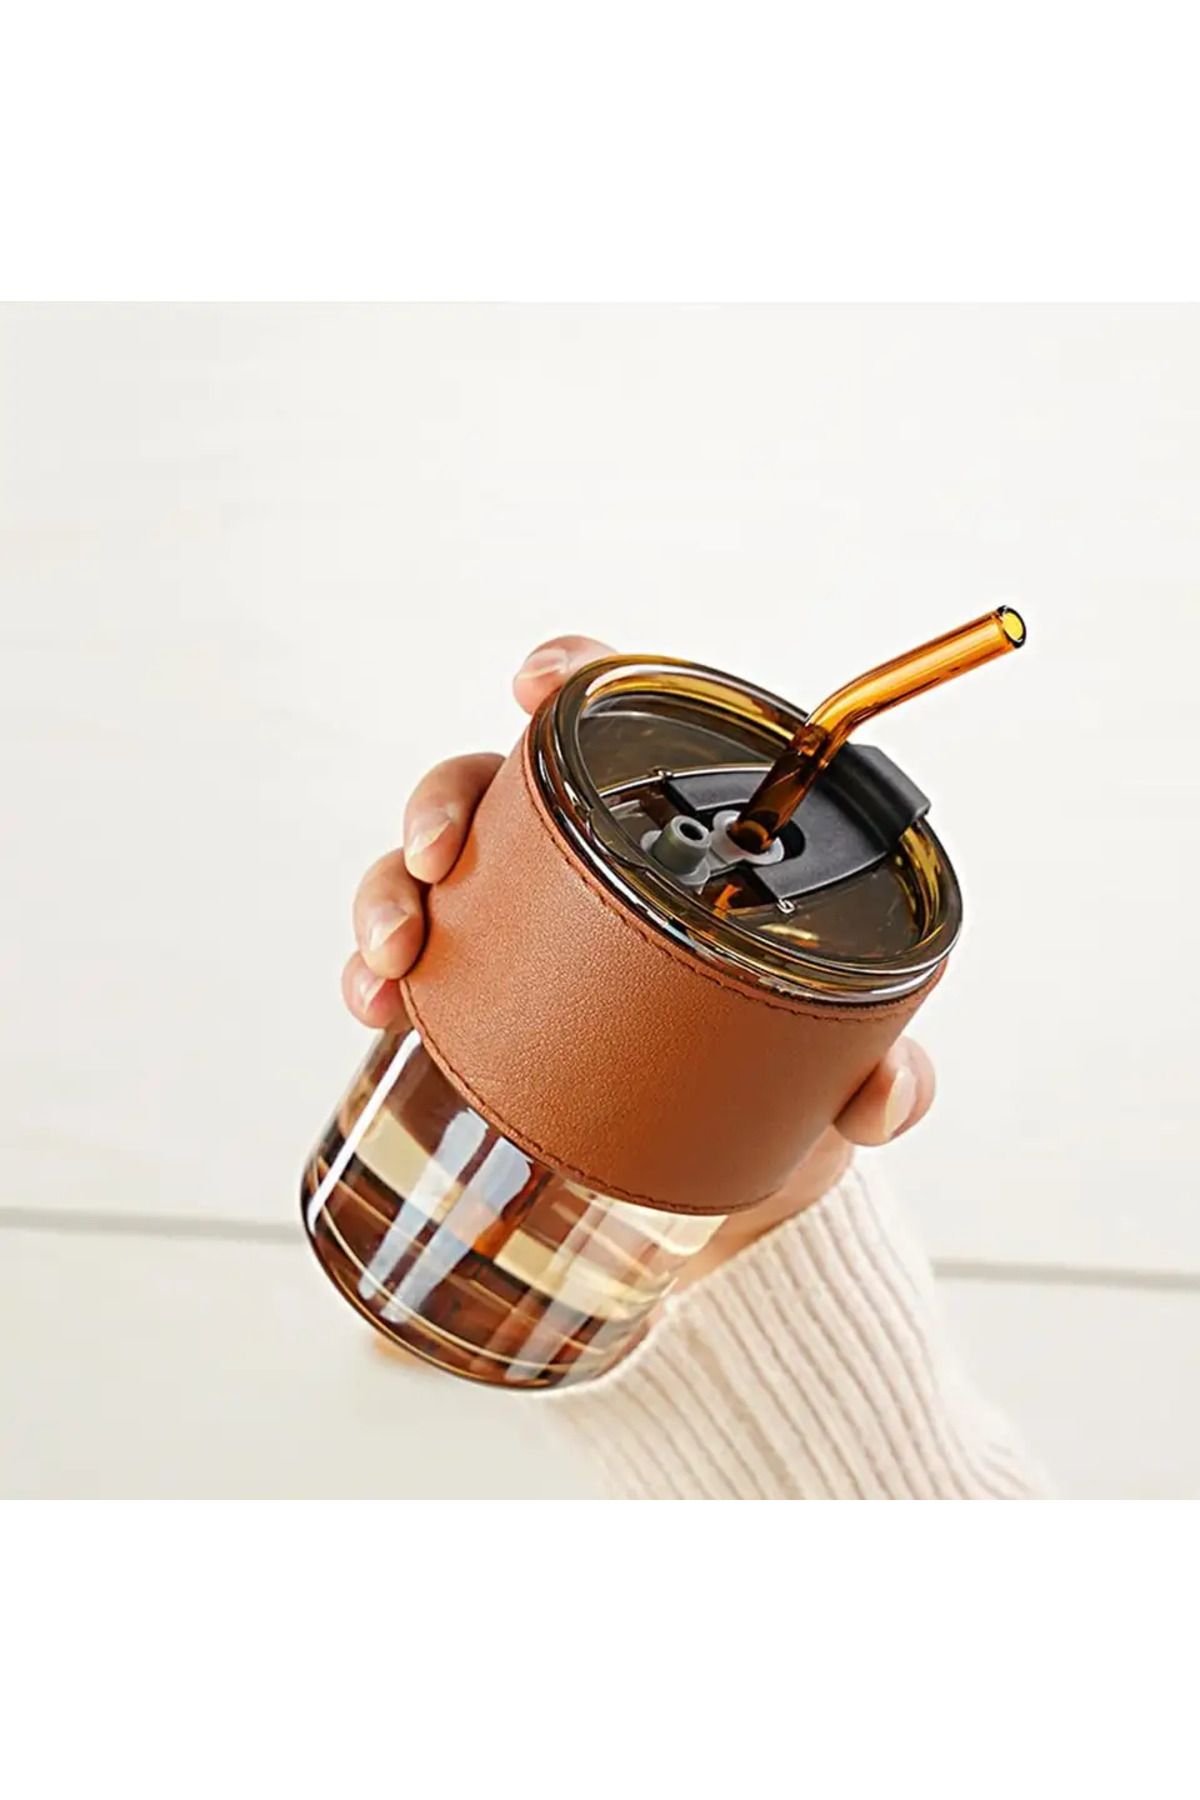 1pc Striped Glass Coffee Cup With Lid & Straw, Portable